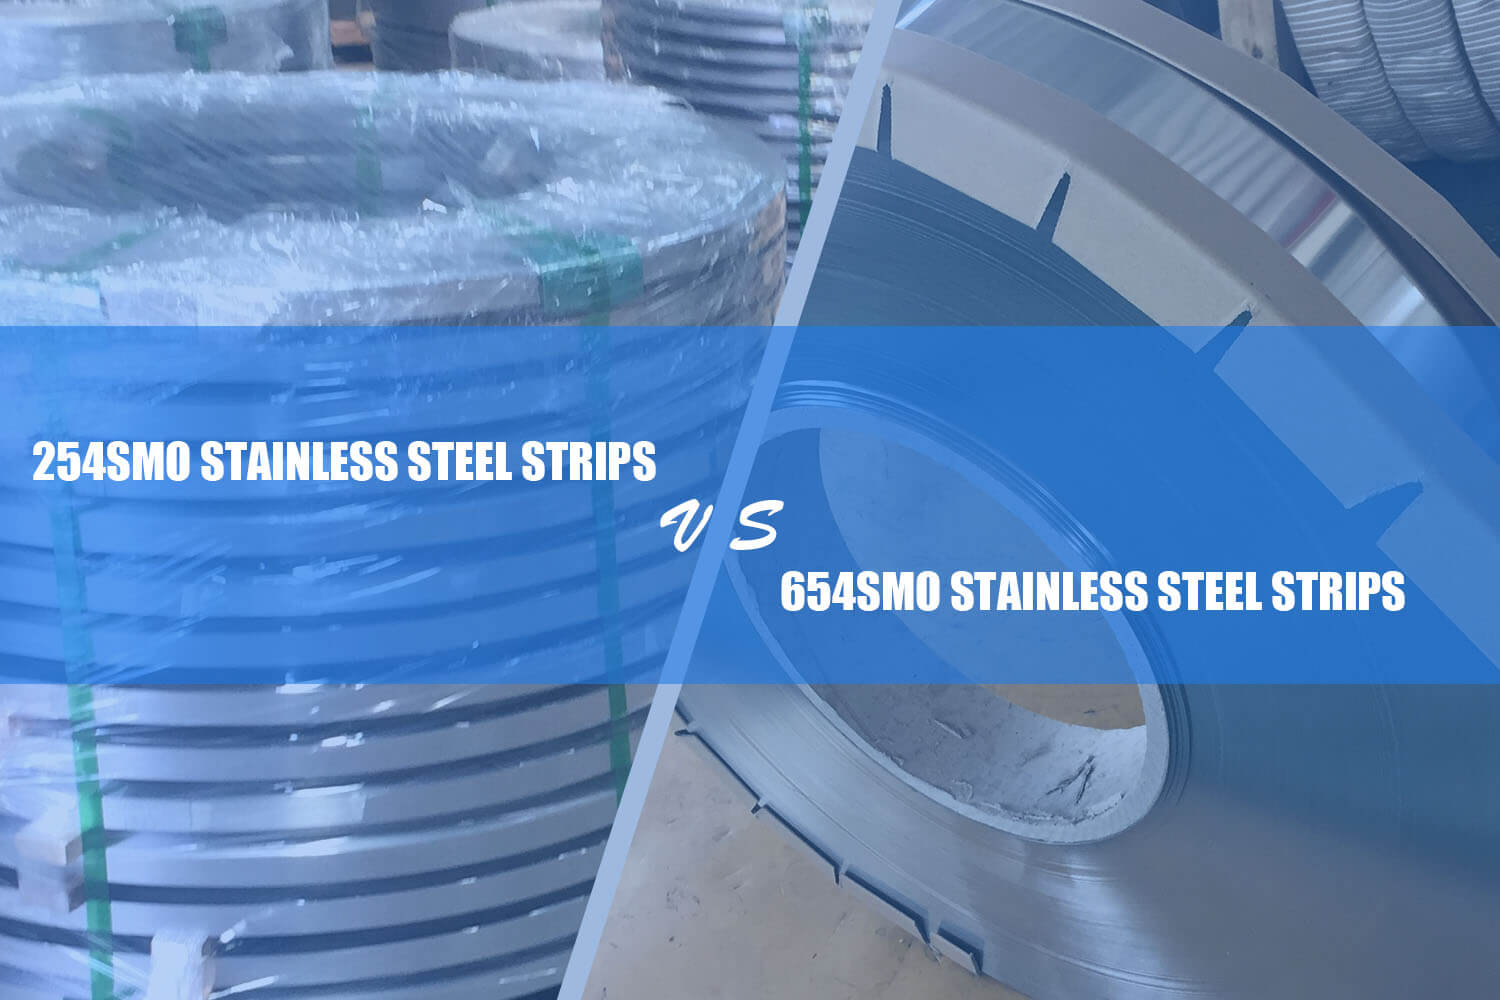 254smo stainless steel strip vs 654smo stainless steel strip